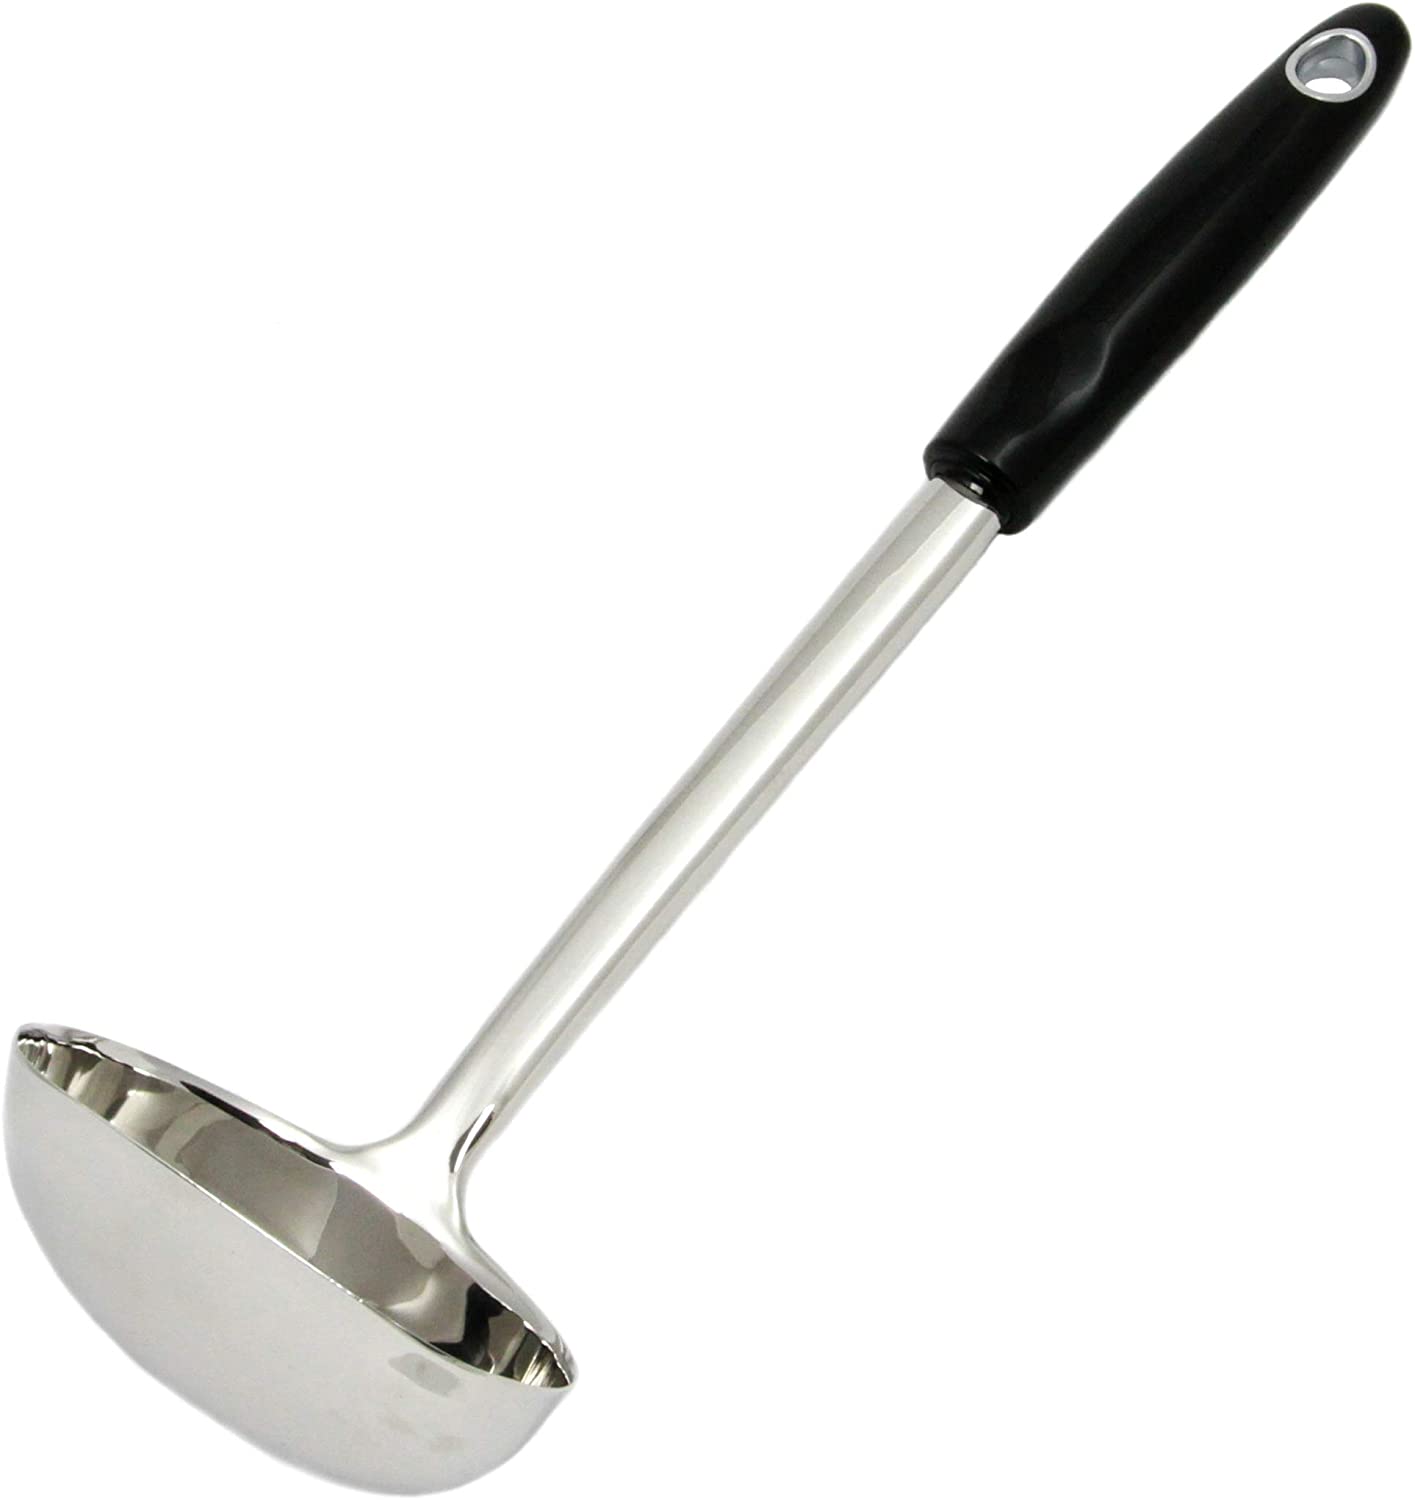 Chef Craft Heavy Duty Ladle, 13 inch, Stainless Steel